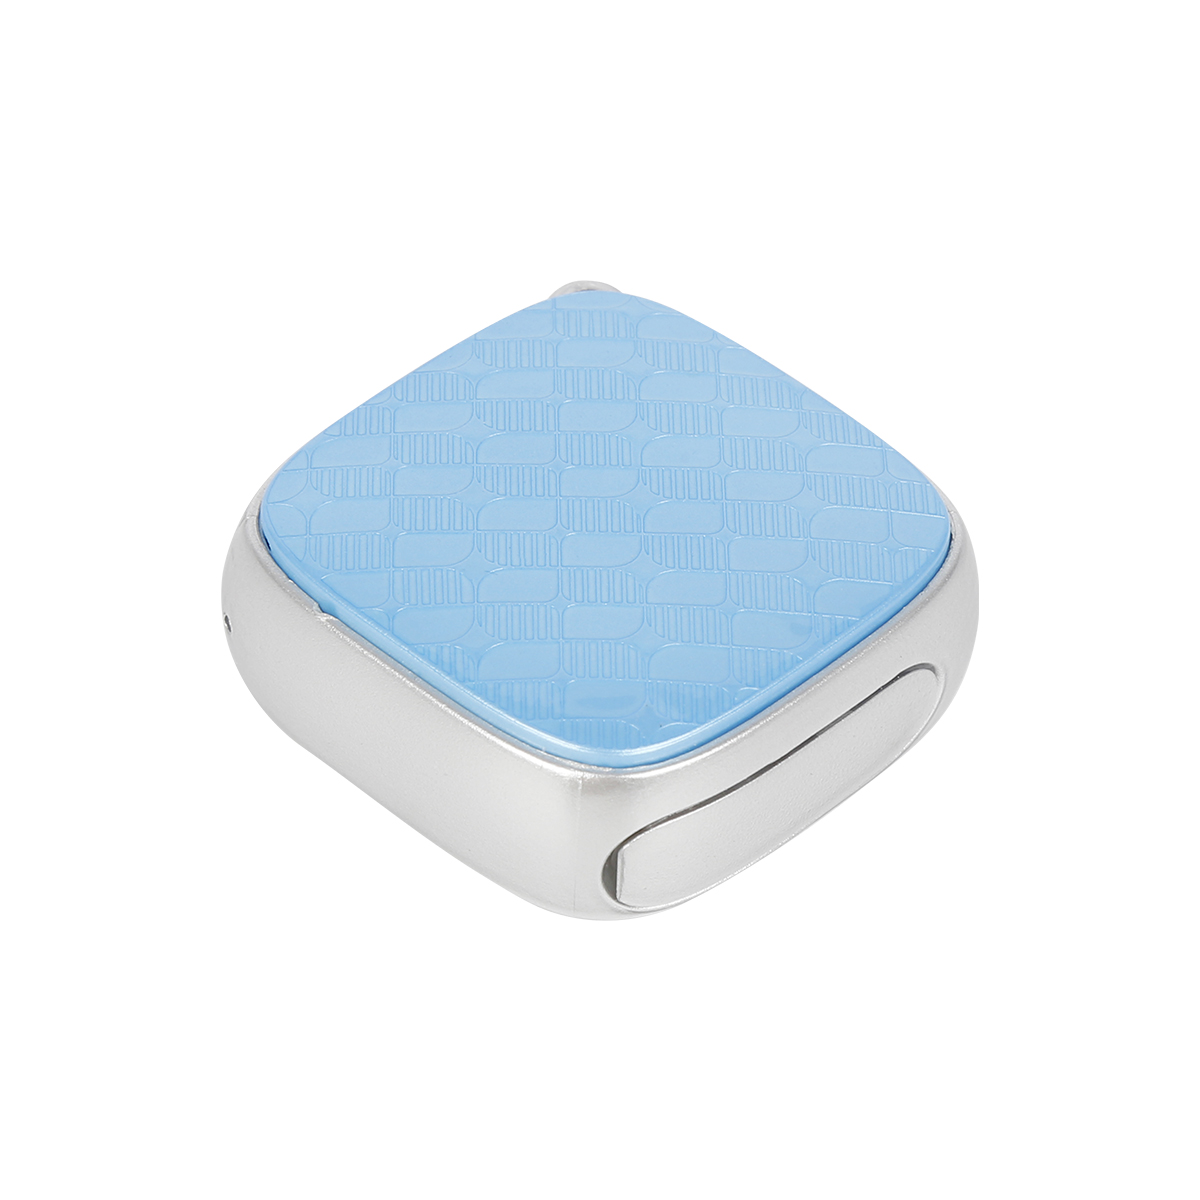 G01 Smallest Personal Old People Mini GPS Tracker for Kids